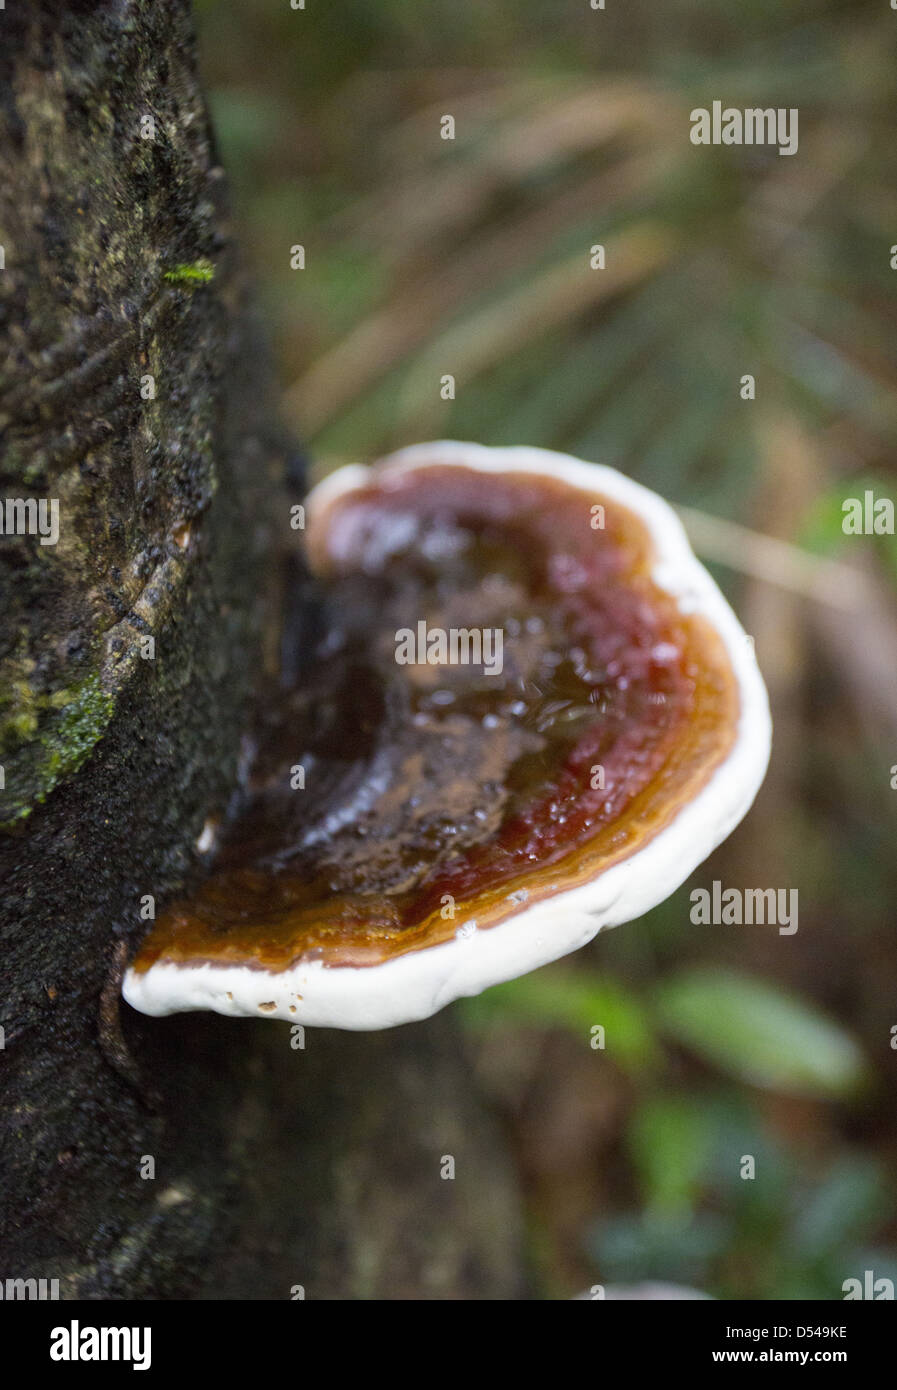 Bracket Fungi growing on a tree trunk, Fraser's Hill, Malaysia Stock Photo